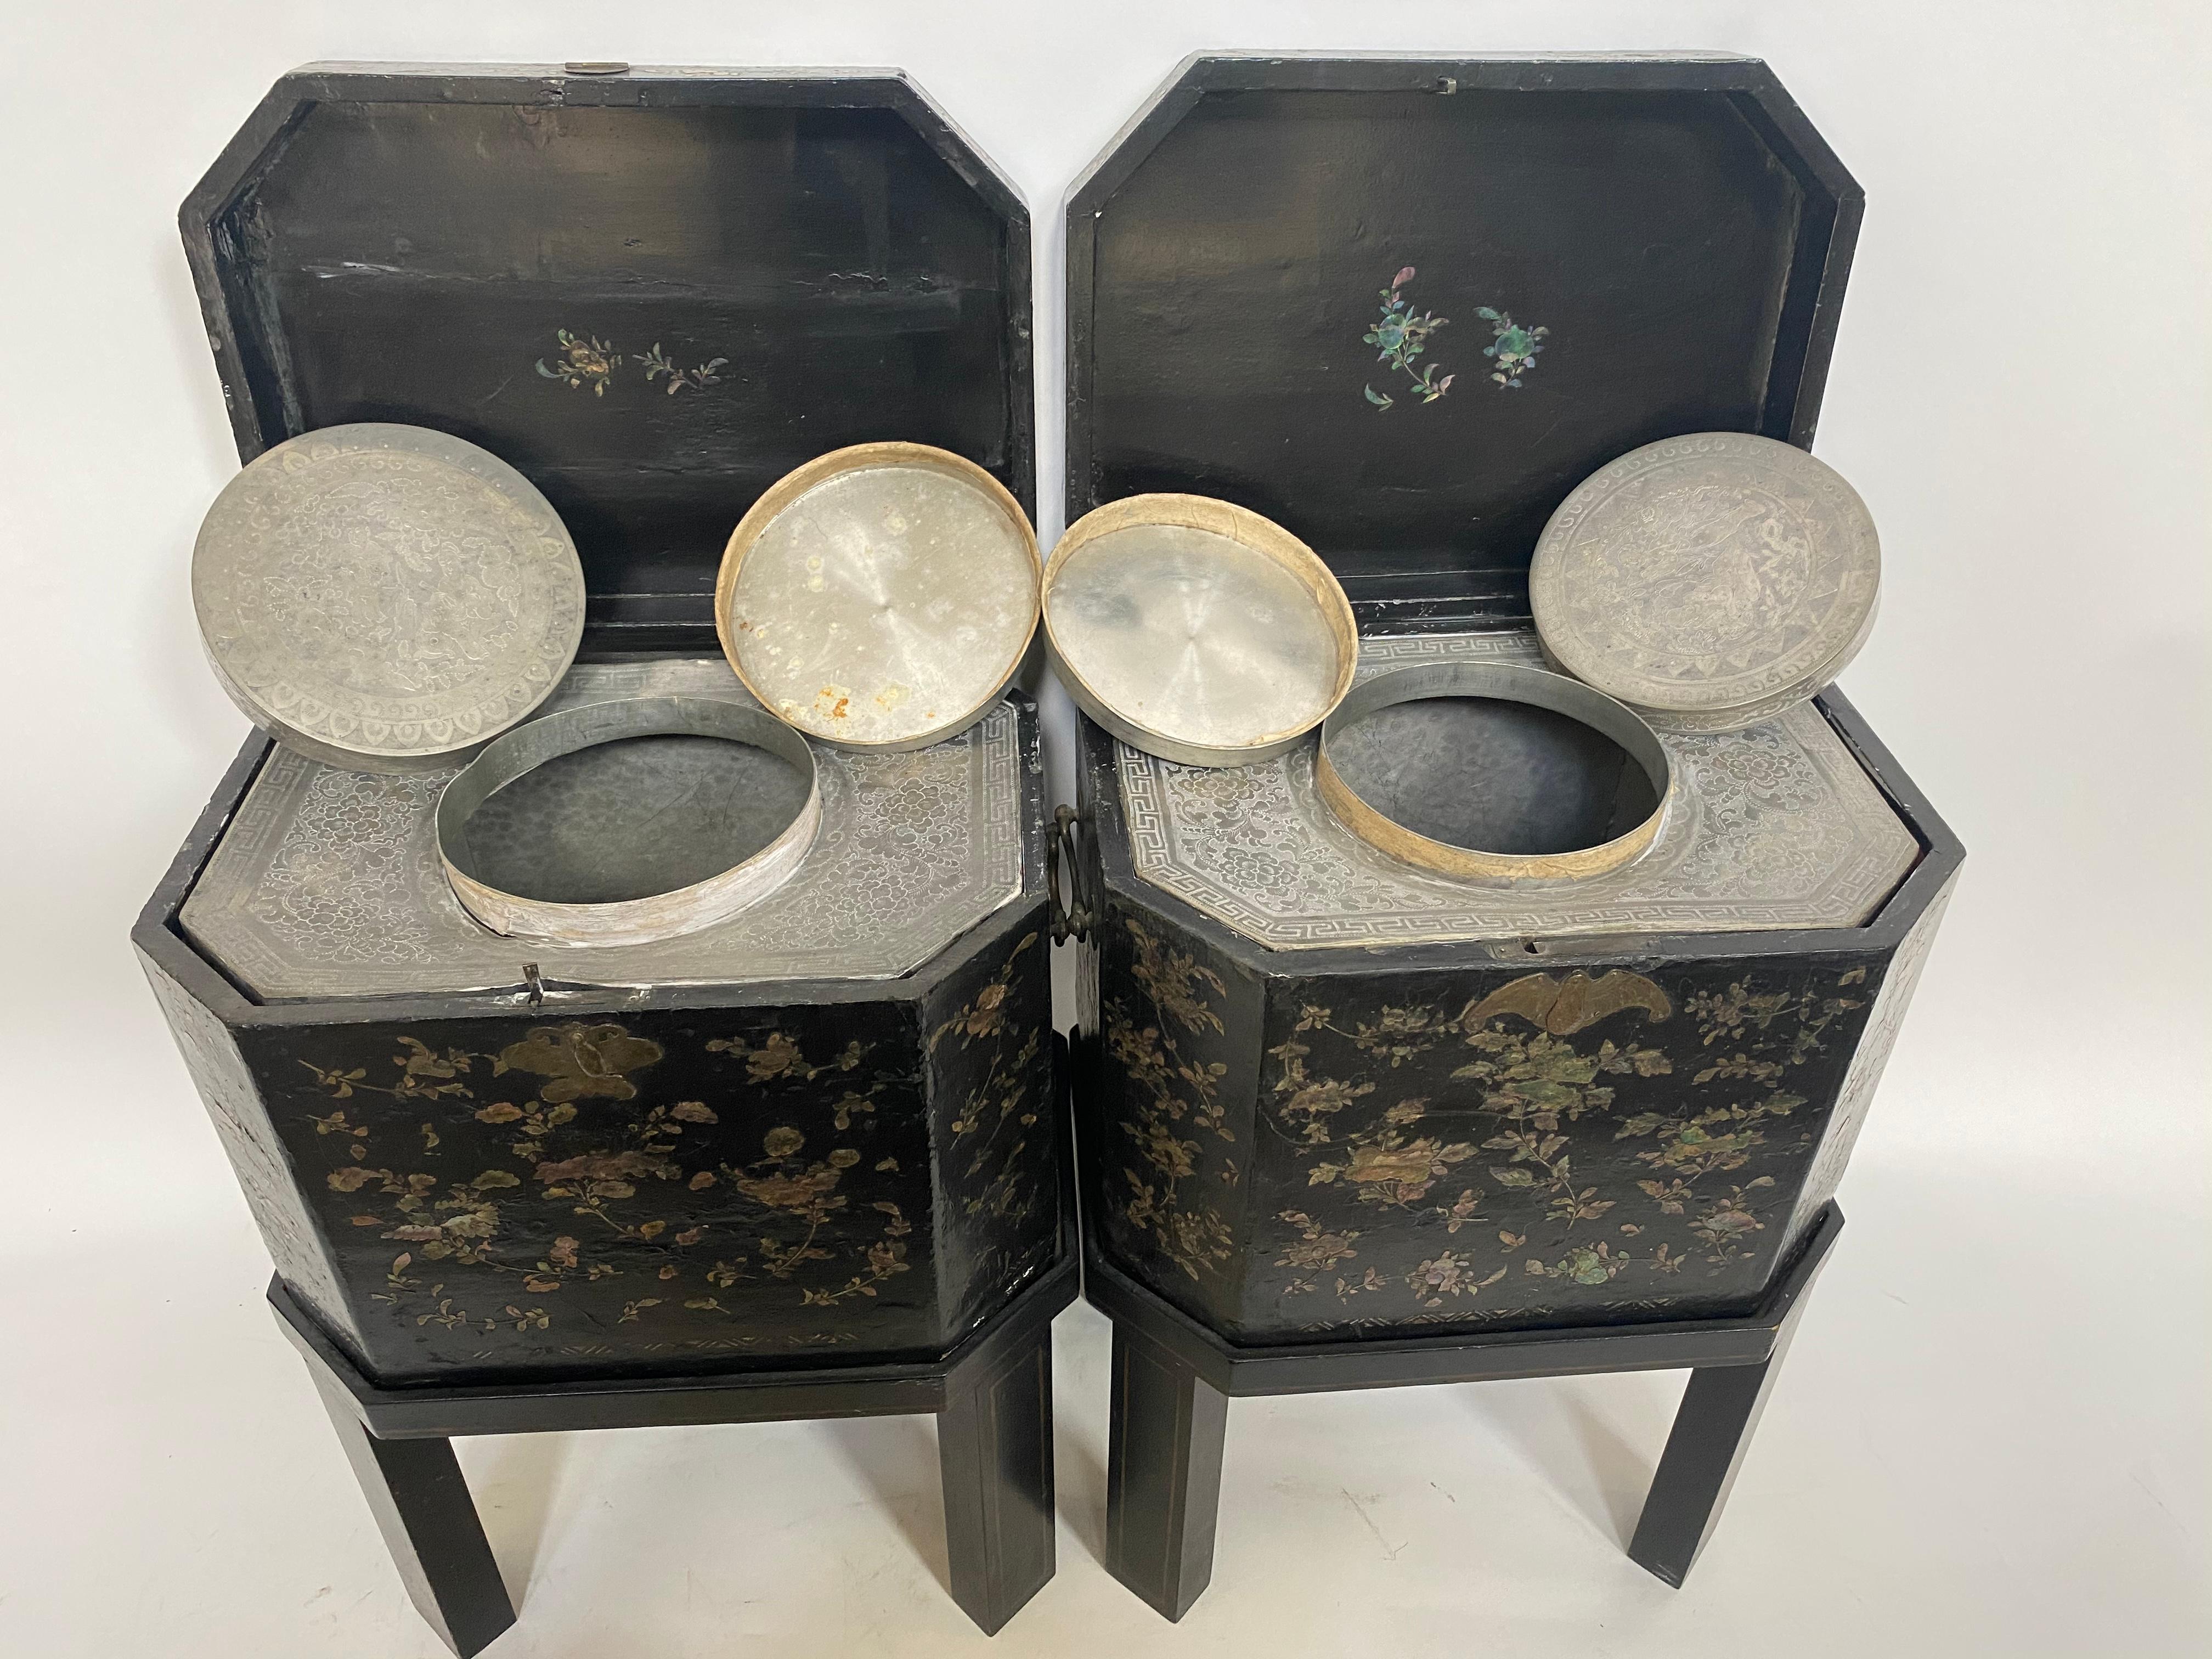 19th Century Unique Pair of Shell Inlaid Black Lacquer Big Chinese Tea Caddies For Sale 6